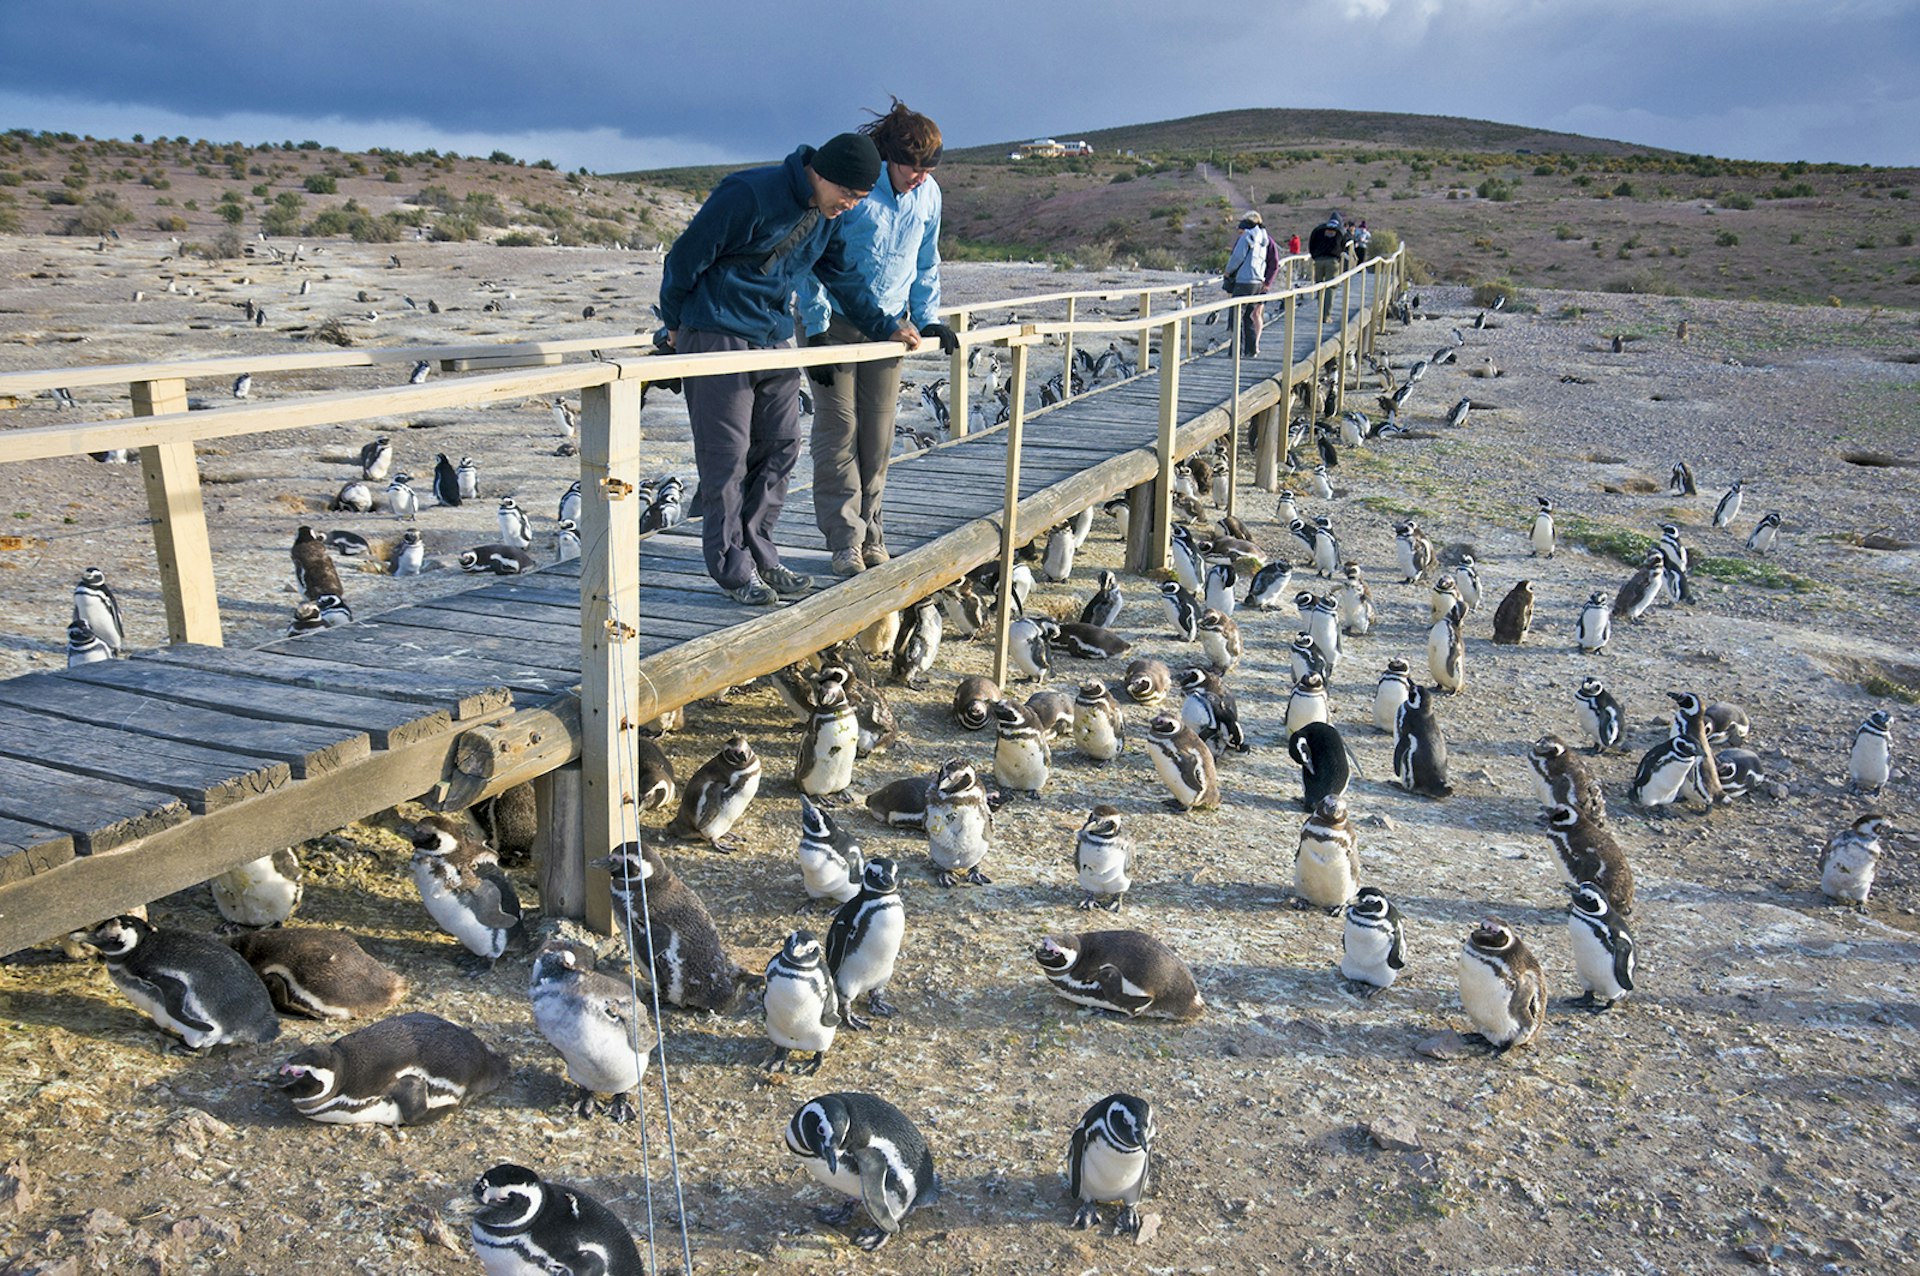 A couple stands on an elevated wooden walking bridge overlooking a colony of penguins. Patagonia, Argentina. 